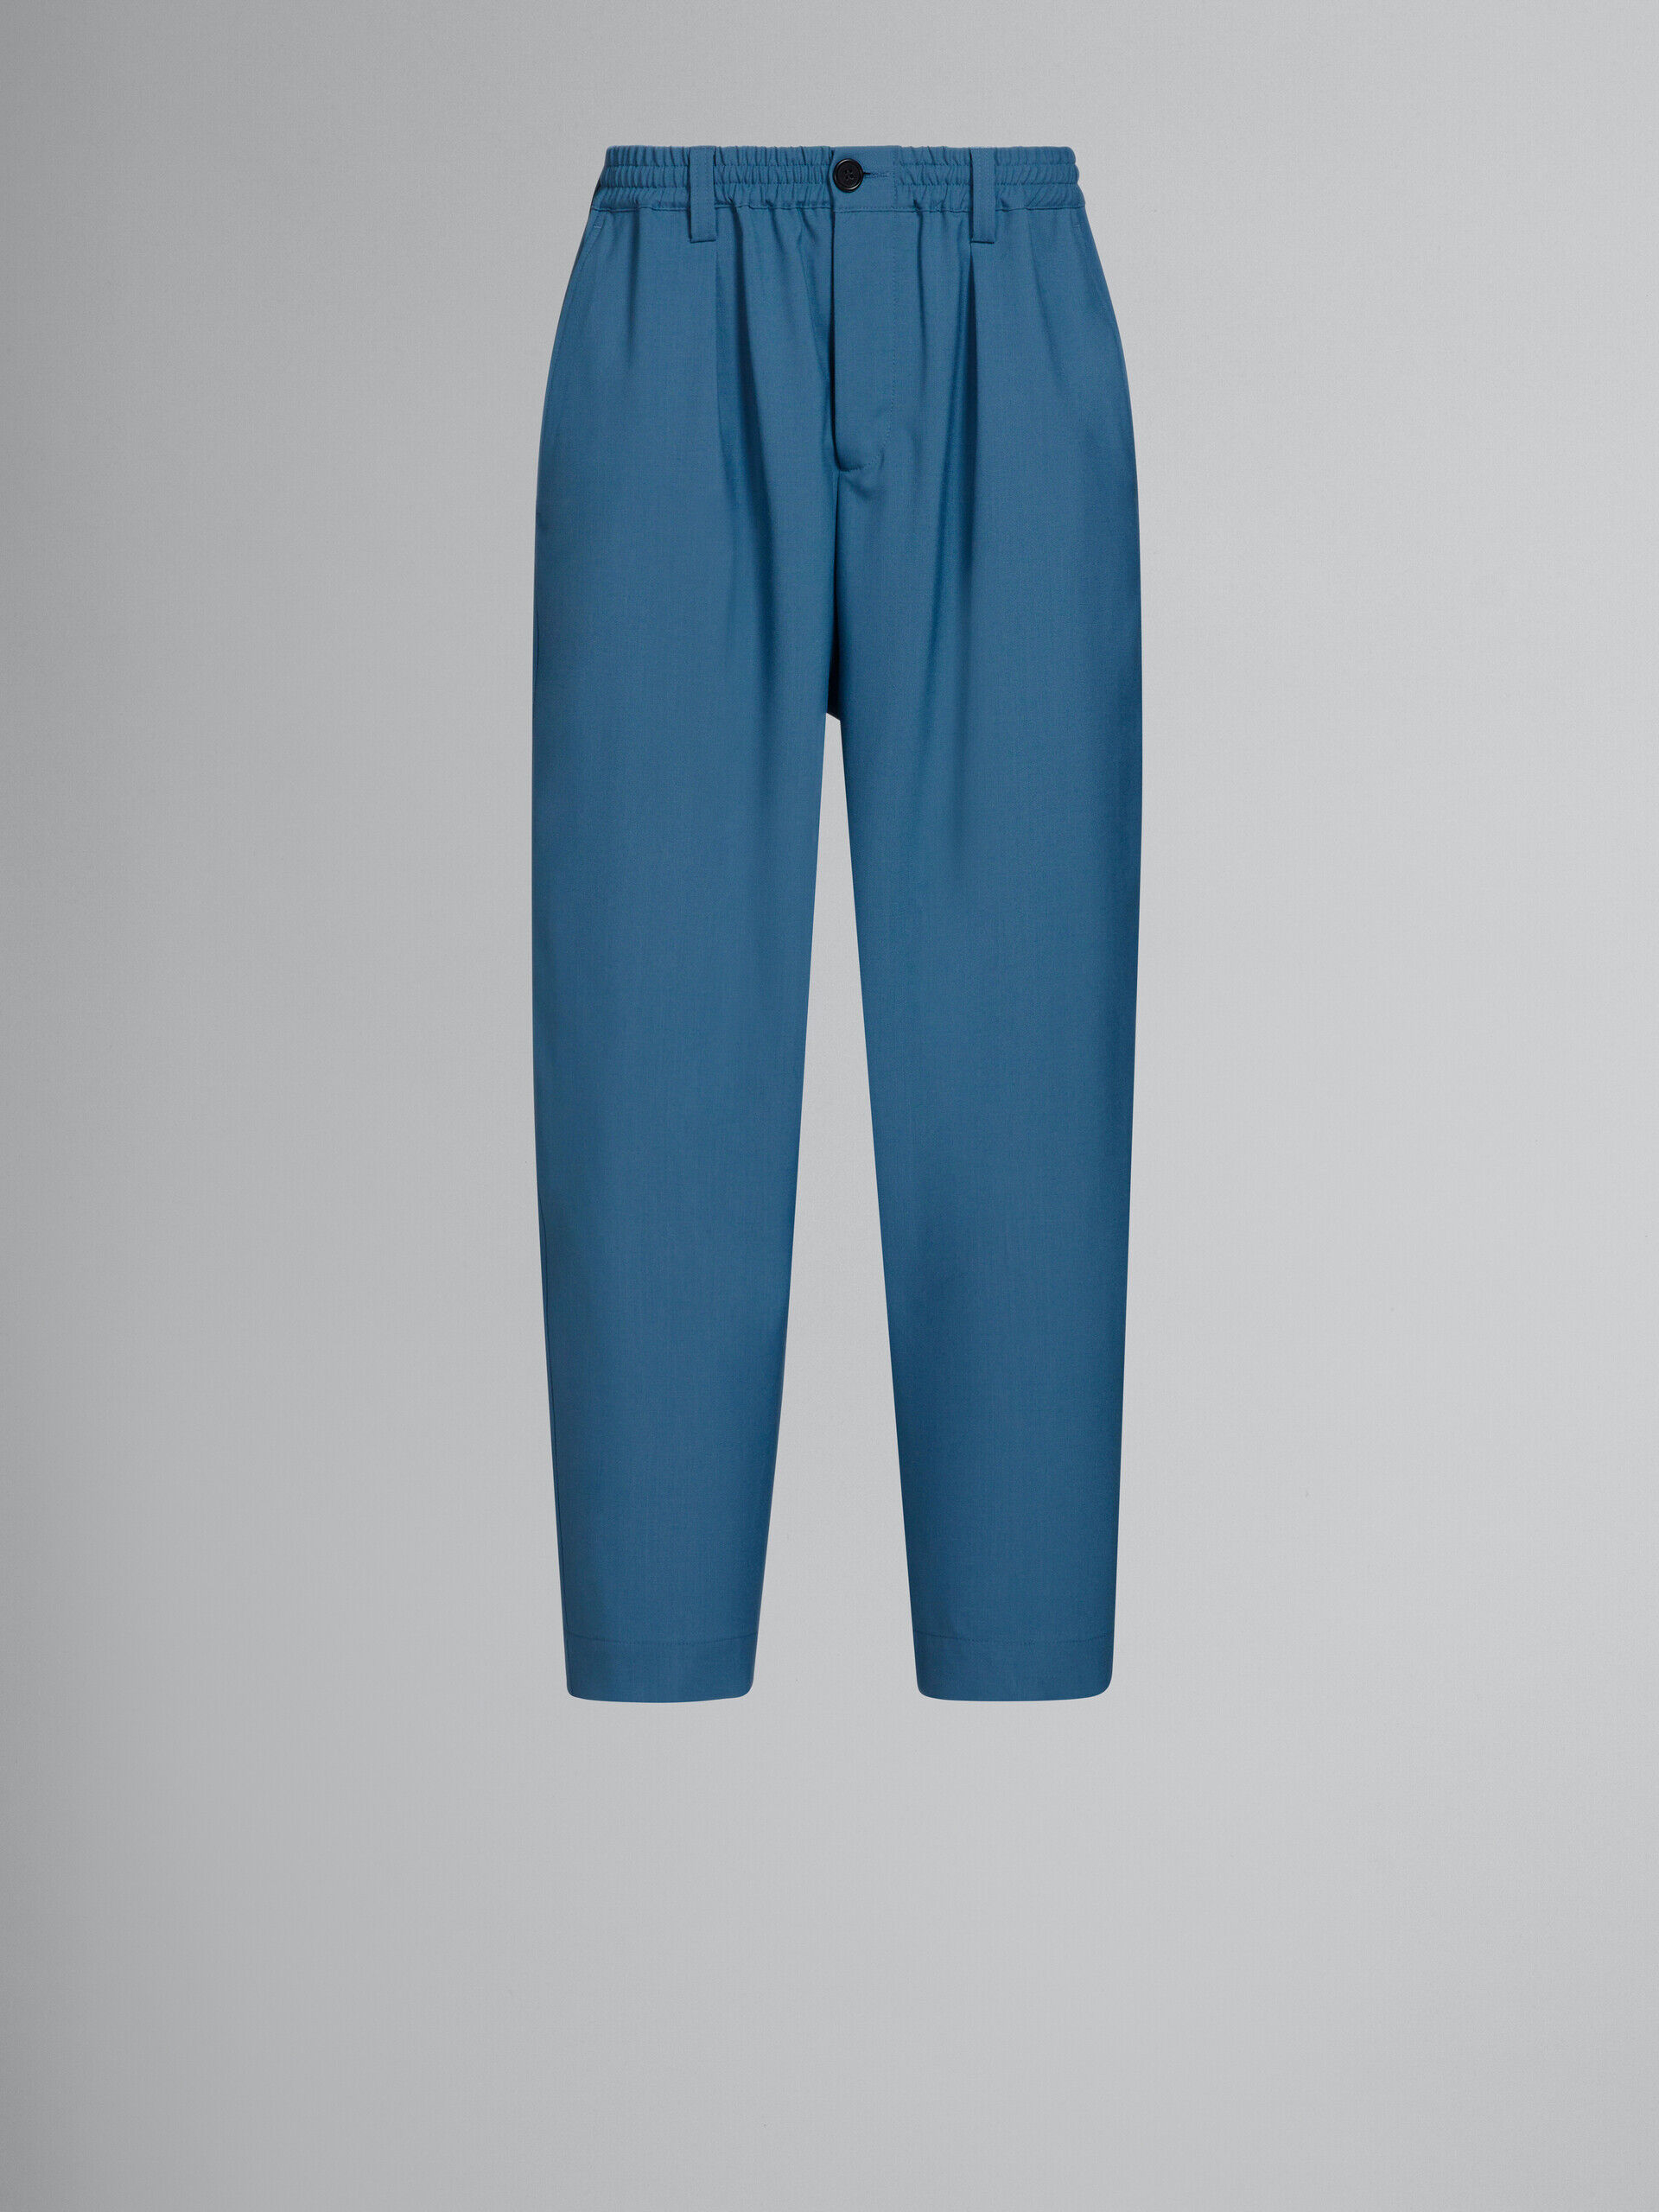 Blue tropical wool drawstring trousers with pleats | Marni